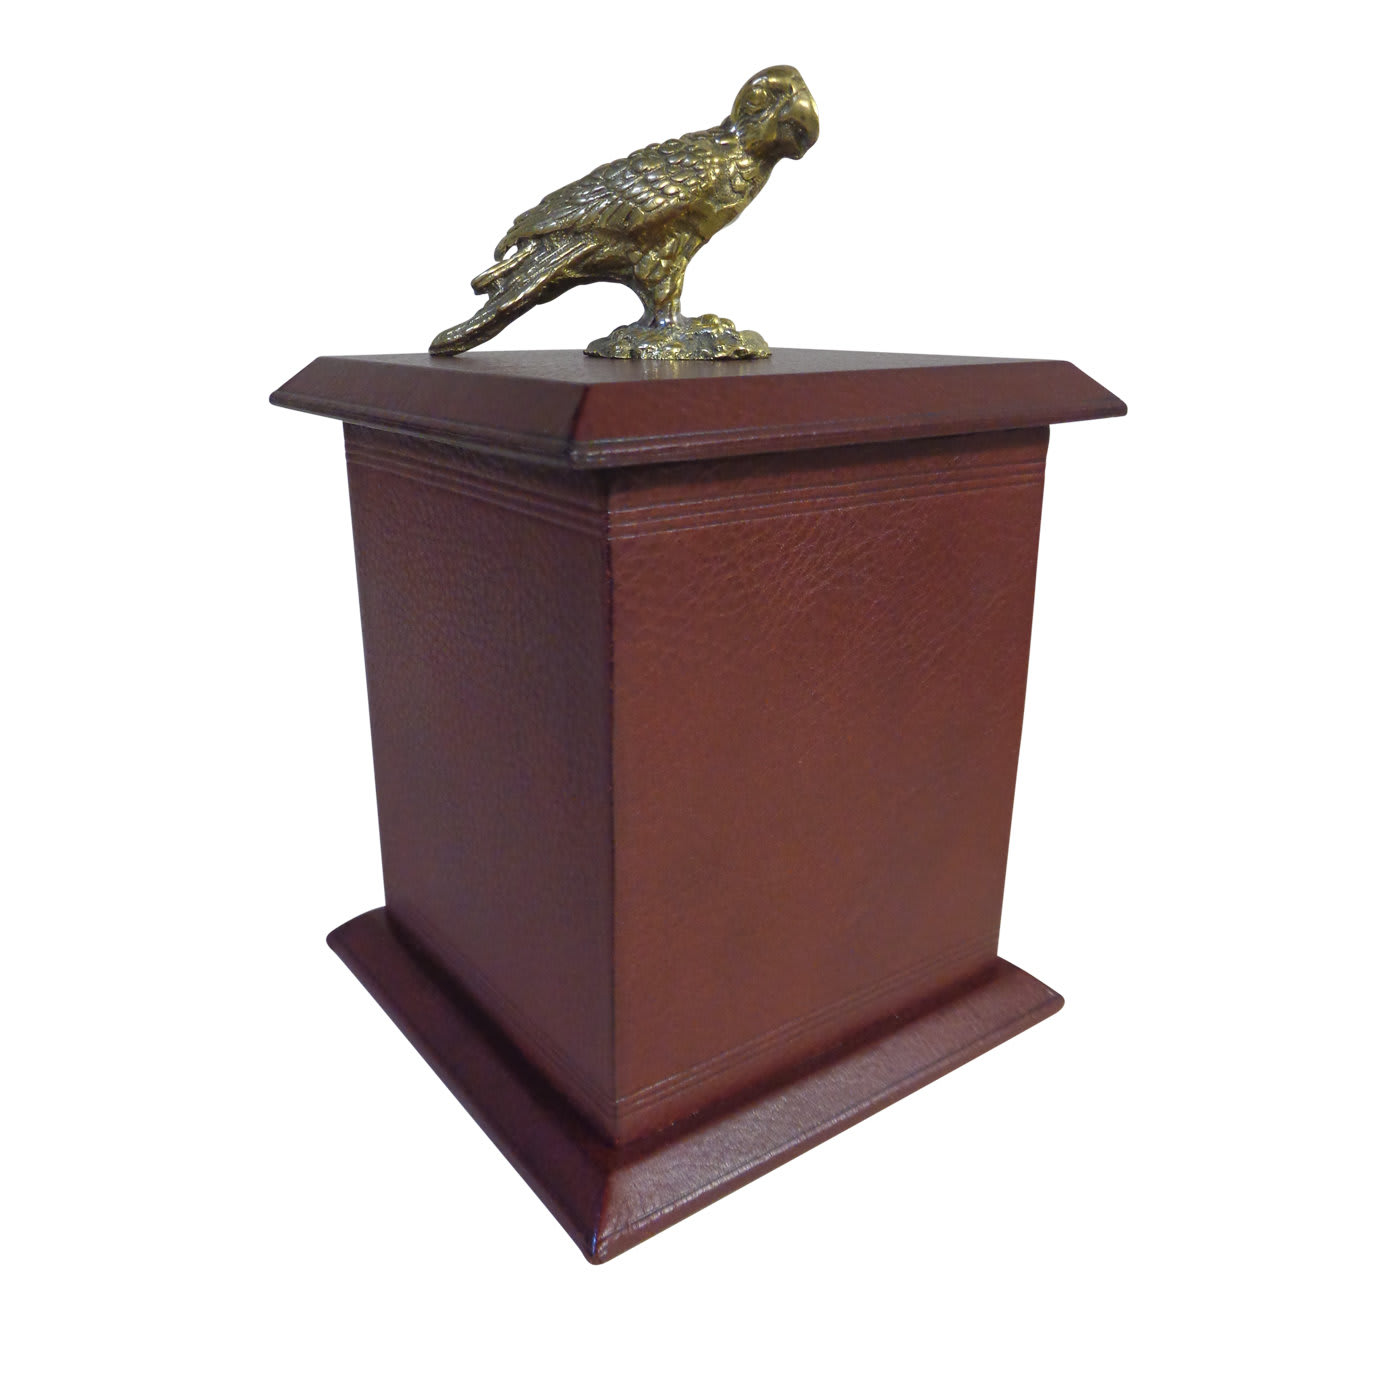 Bordeaux Leather Box with Brass Parrot - AtelierGK Firenze